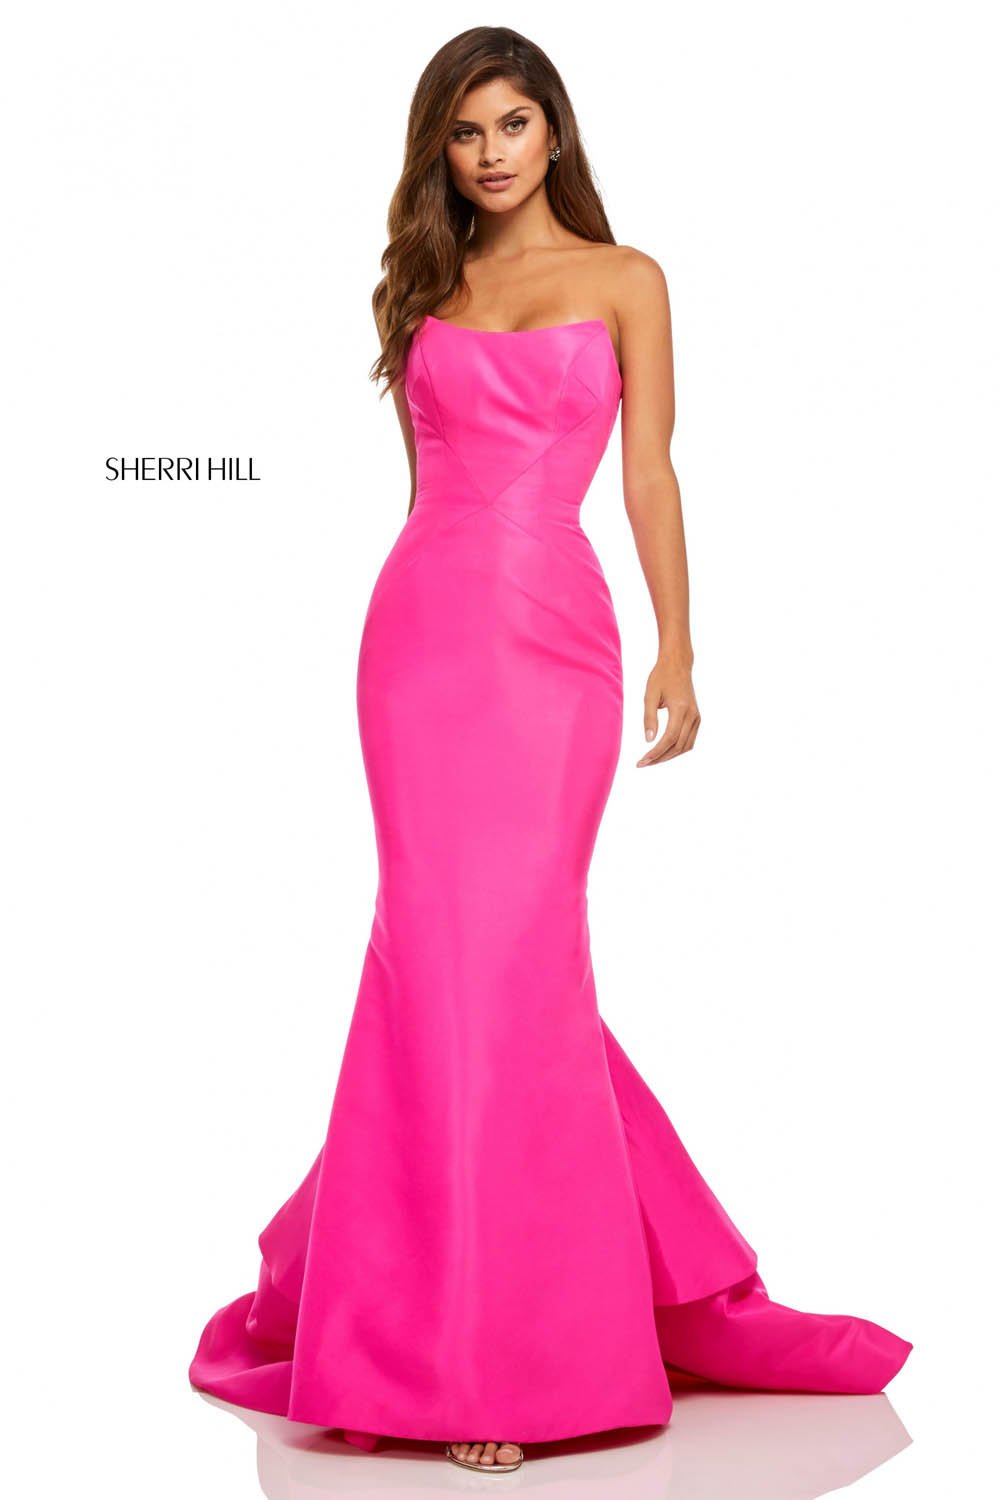 Sherri Hill 52601 dress images in these colors: Emerald, Navy, Red, Yellow, Bright Pink, Light Blue, Orange.